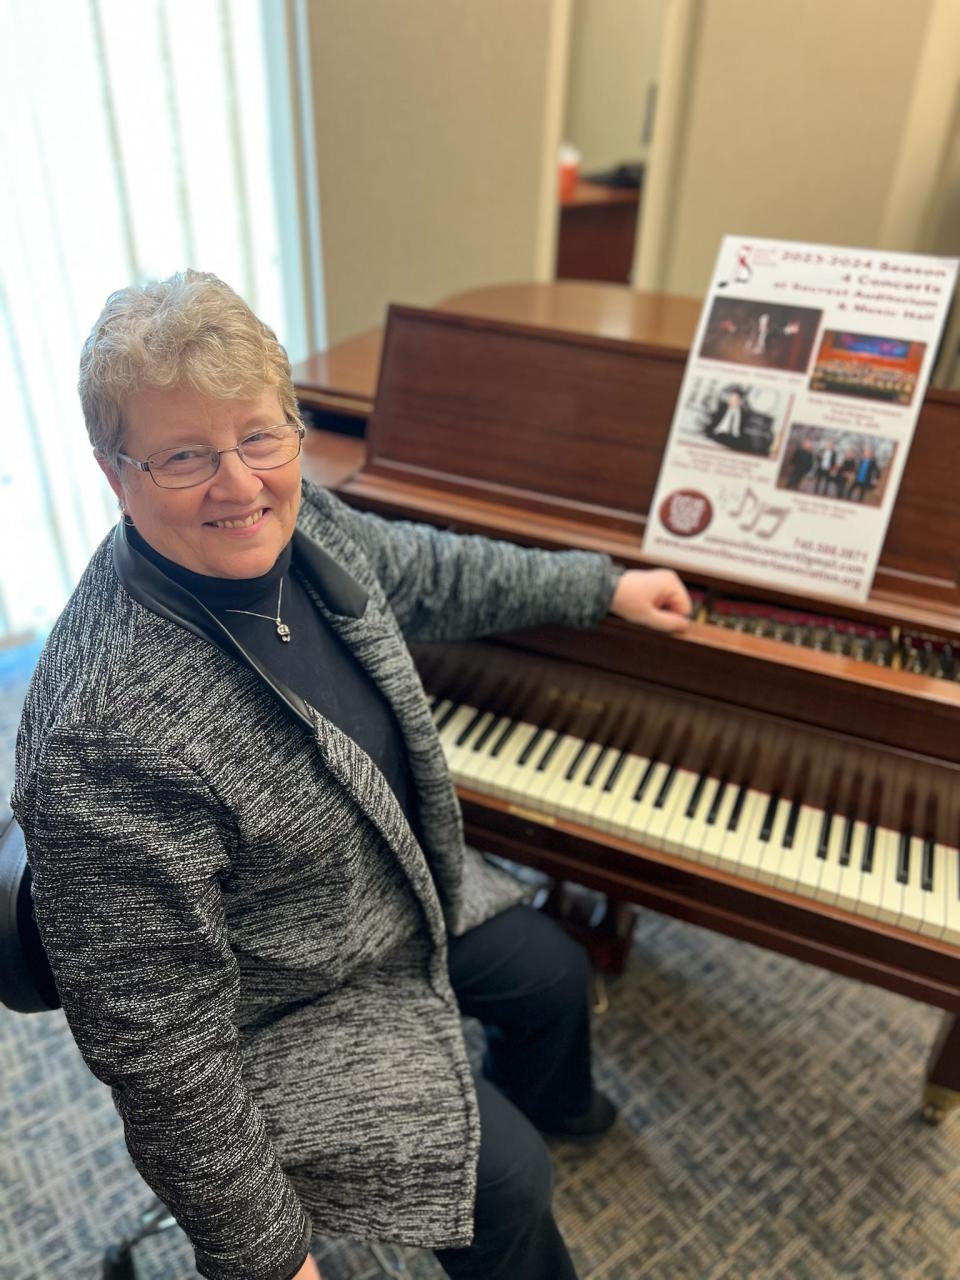 Sherly Wise is the president of the Zanesville Concert Association. She had been a board member of the association for many years before filing the vice president vacancy, which lead to her current position.